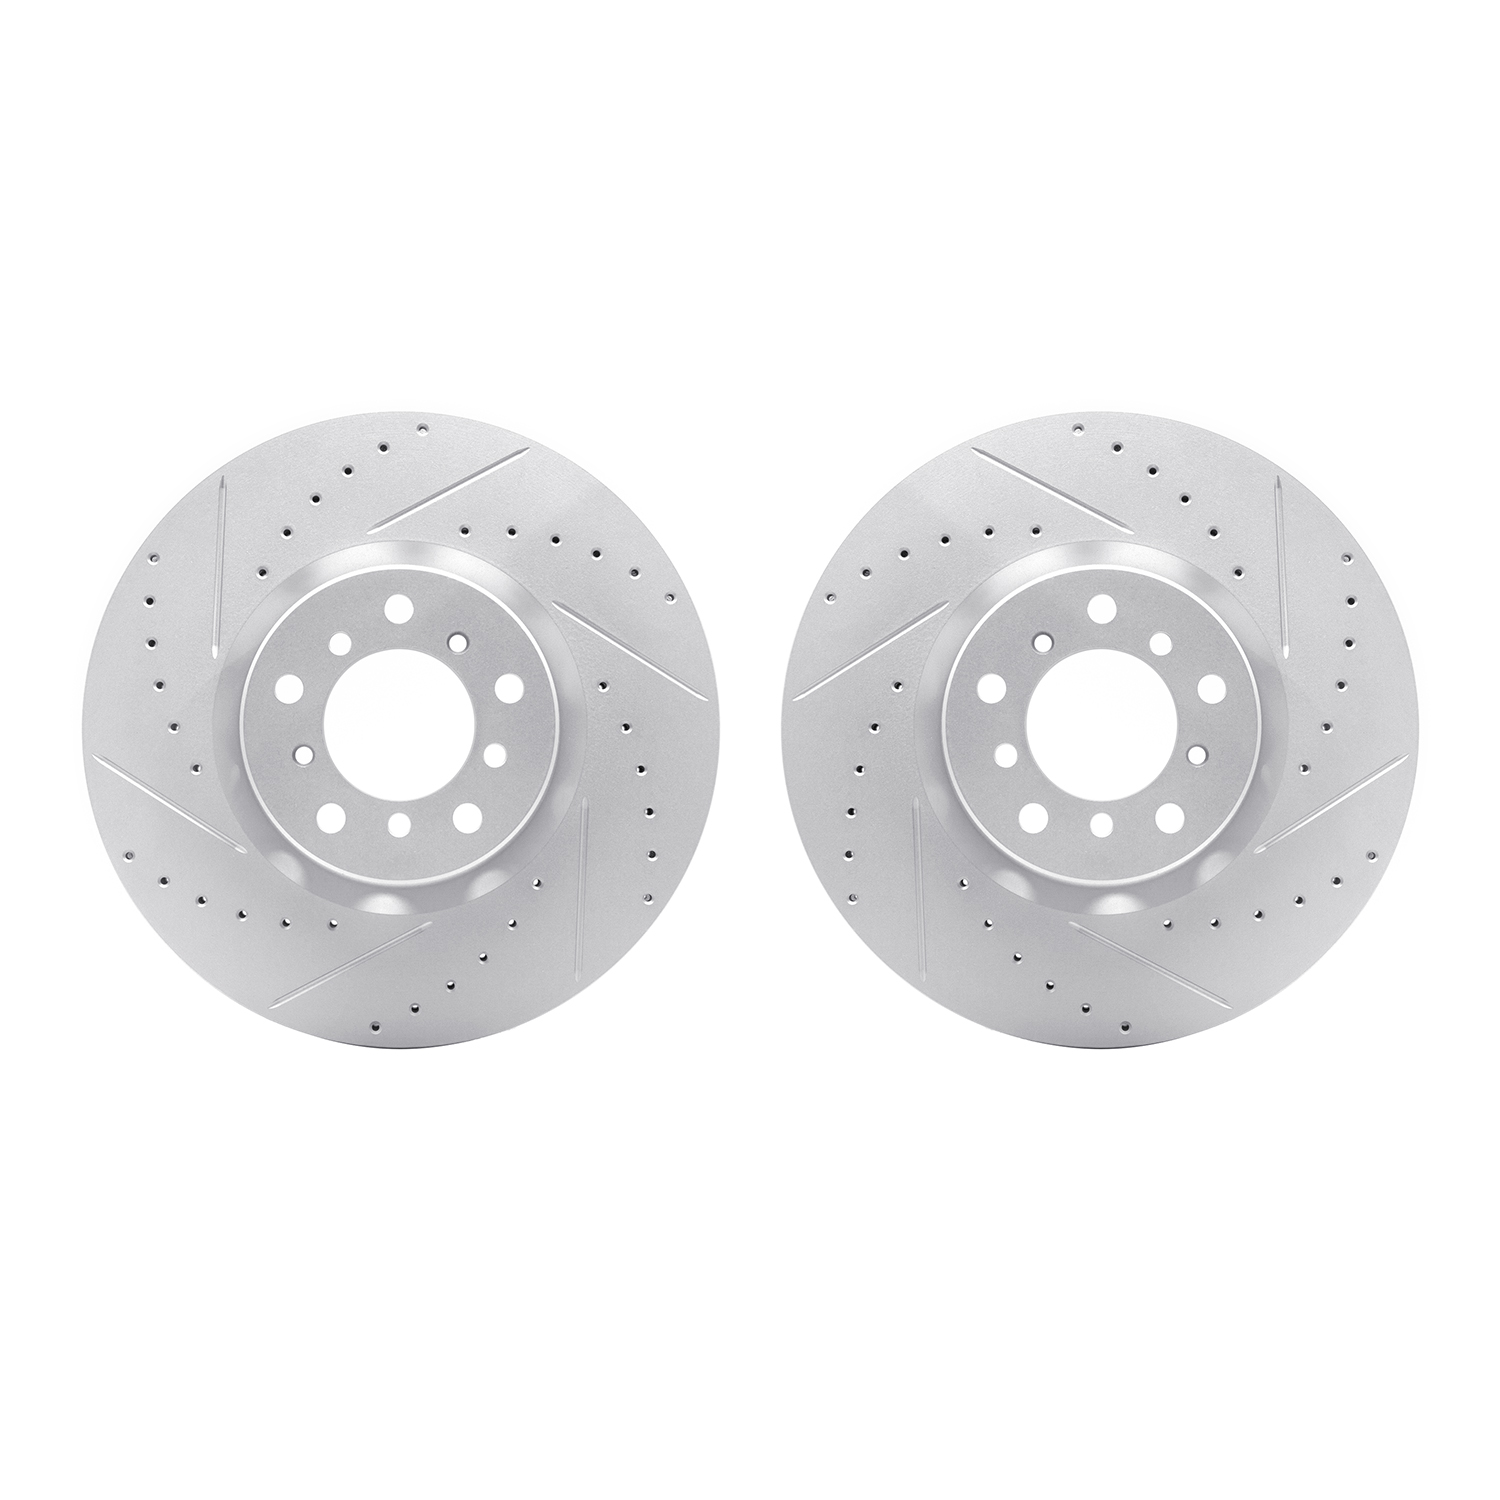 2002-31039 Geoperformance Drilled/Slotted Brake Rotors, 2000-2003 BMW, Position: Front